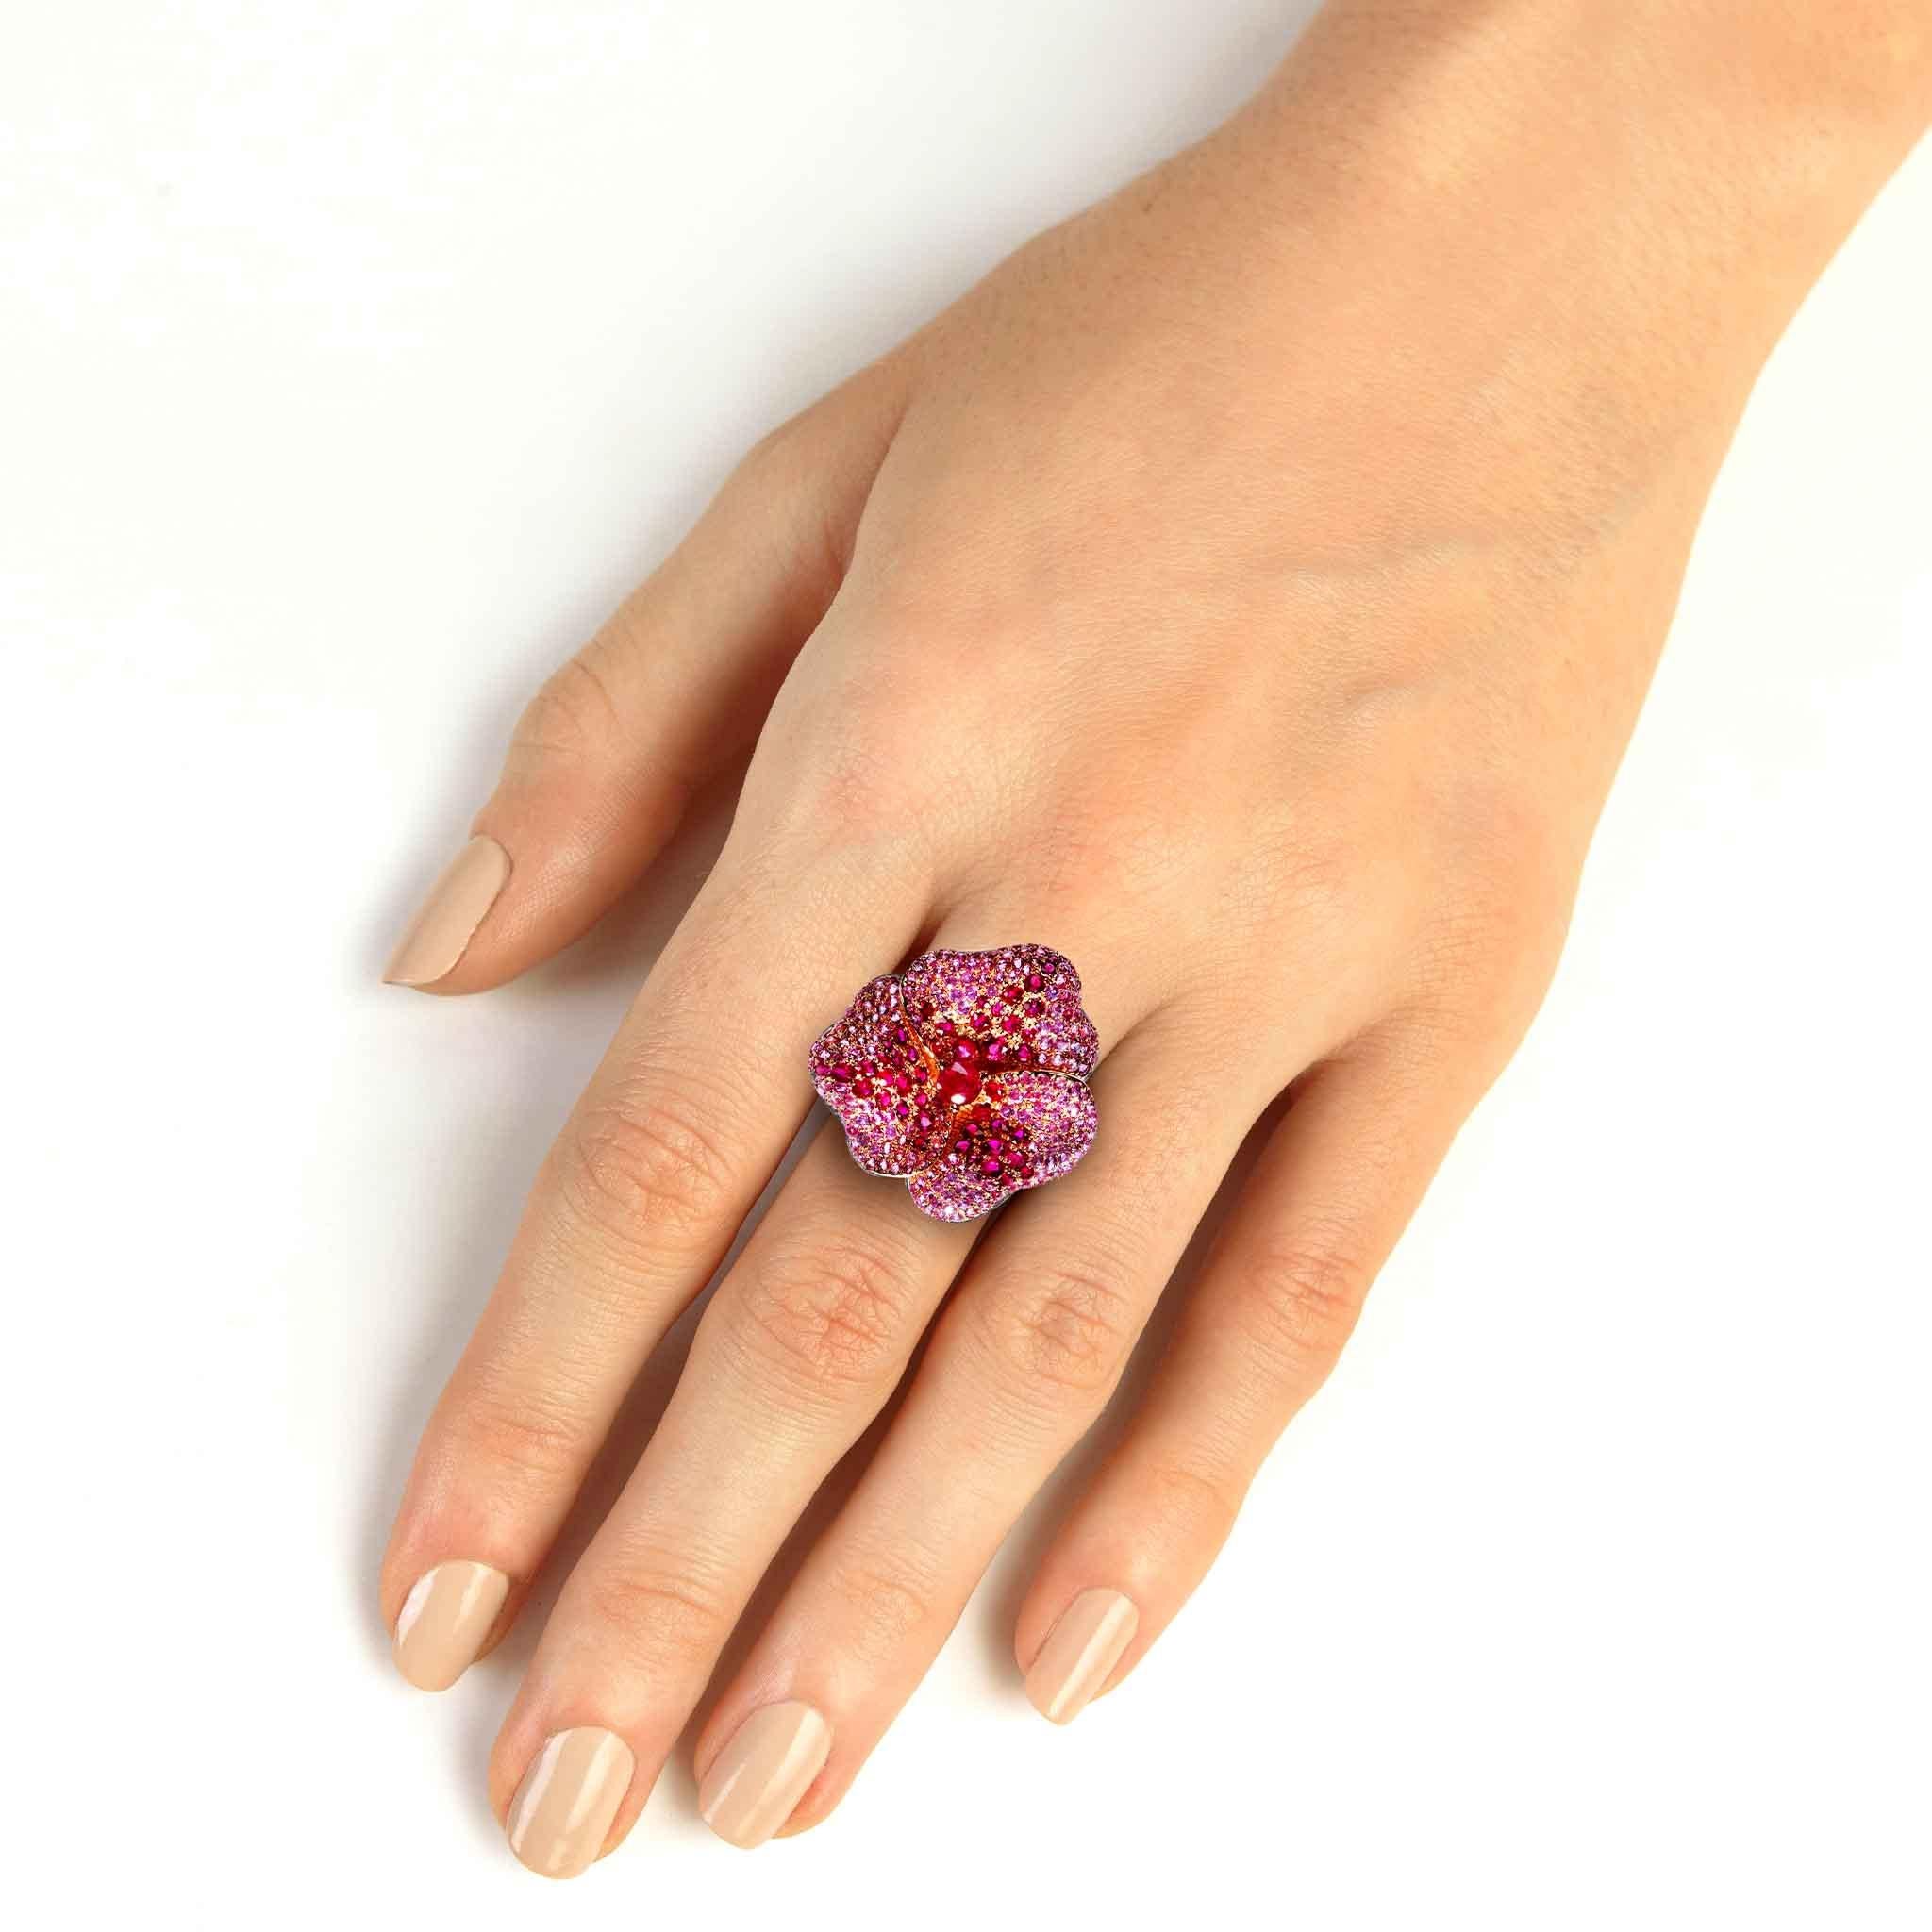 Looking for a truly stunning cocktail ring? This Large Flower Pink Sapphire Ring in Rose Gold is absolutely stunning, and perfect for making a statement. The 18K rose gold is beautiful and unique, and the pink sapphires are just gorgeous. This ring